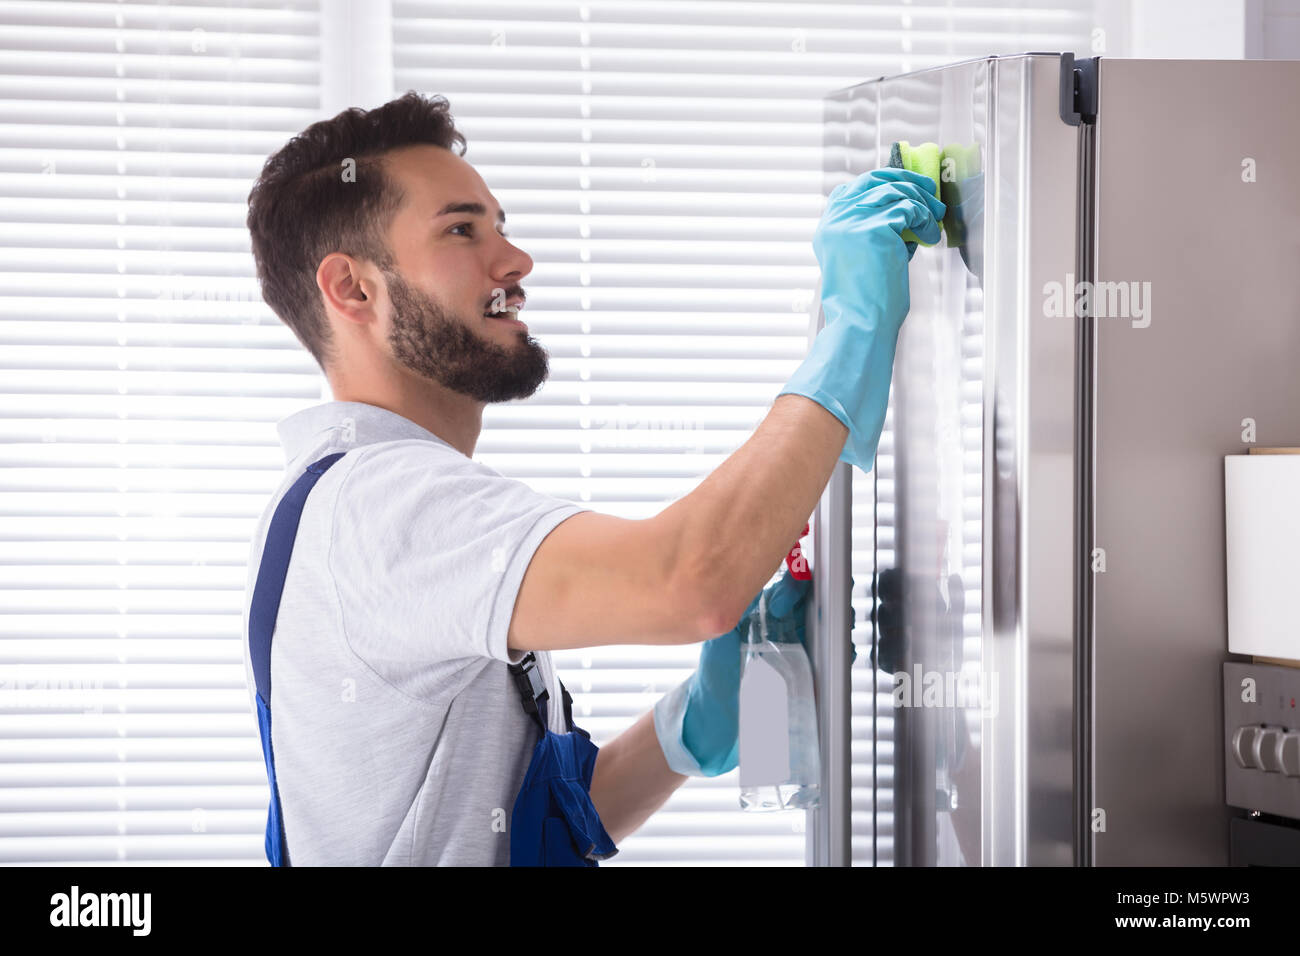 Side View Of A Young Male Janitor Cleaning Refrigerator In Kitchen Stock Photo